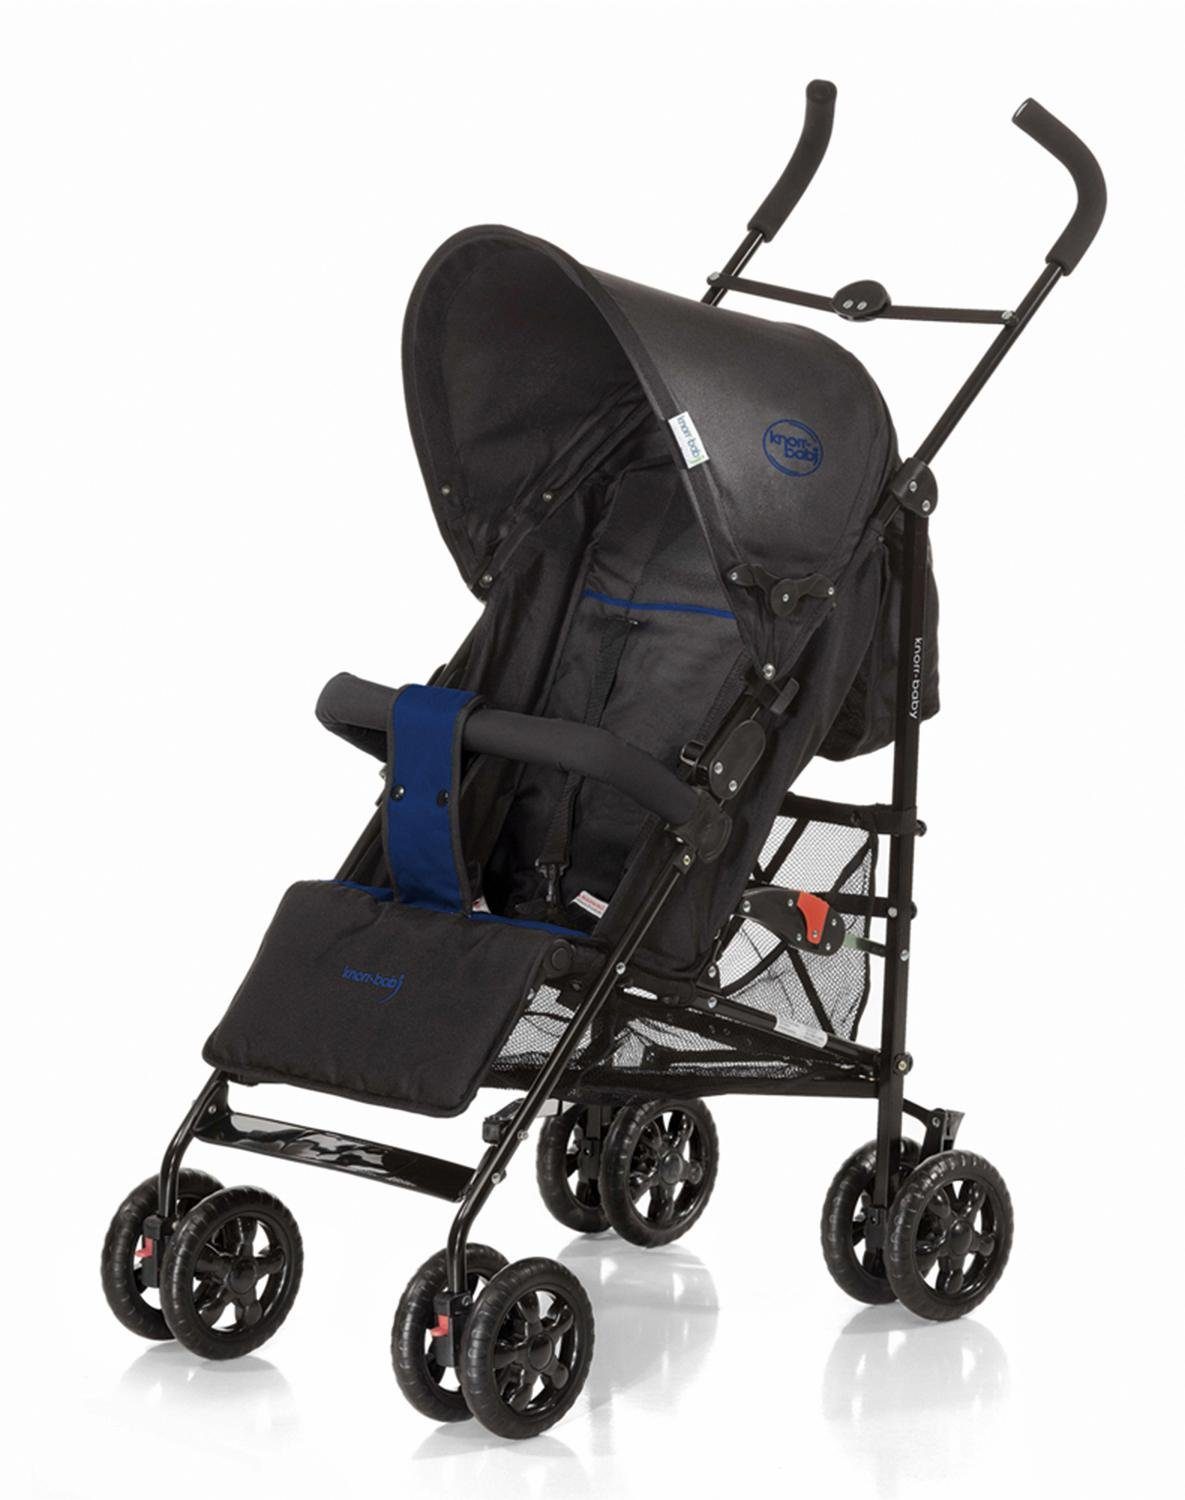 Knorr-baby knorr-baby buggy, Commo Sport, blauw